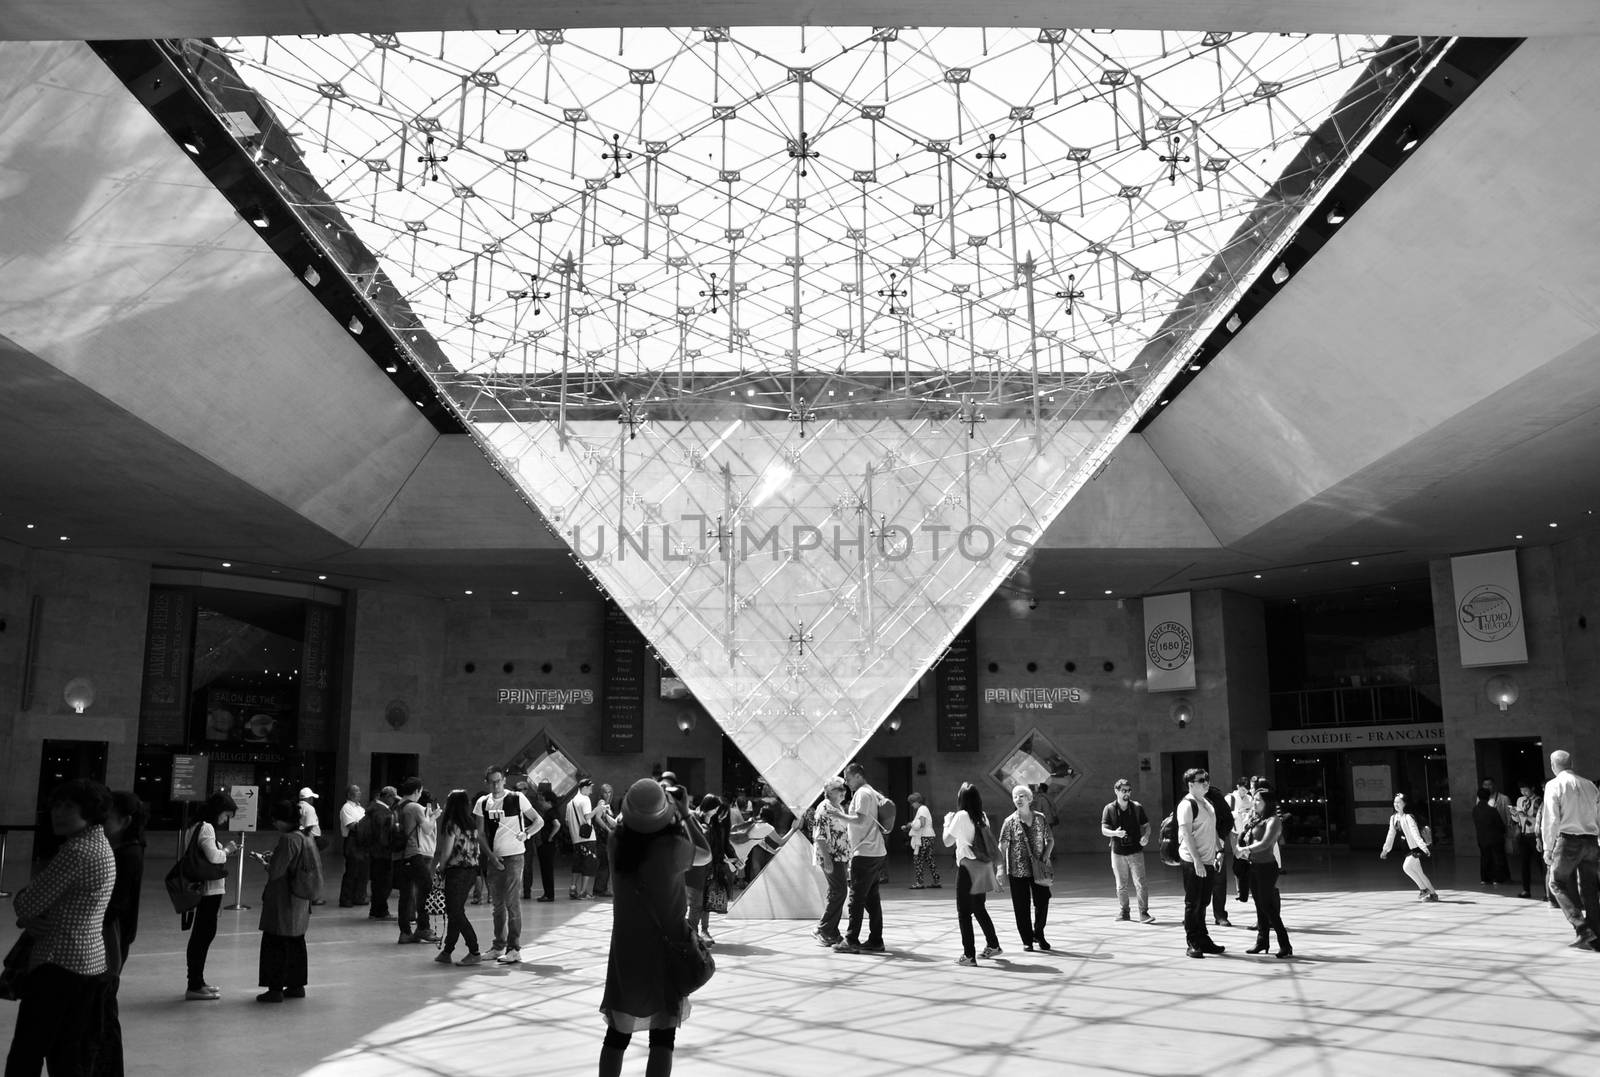 Paris, France - May 13, 2015: Tourists visit Inside the Louvres pyramid on May 13, 2015 in Paris. Louvre is one of the biggest Museum in the world, receiving more than 8 million visitors each year. 